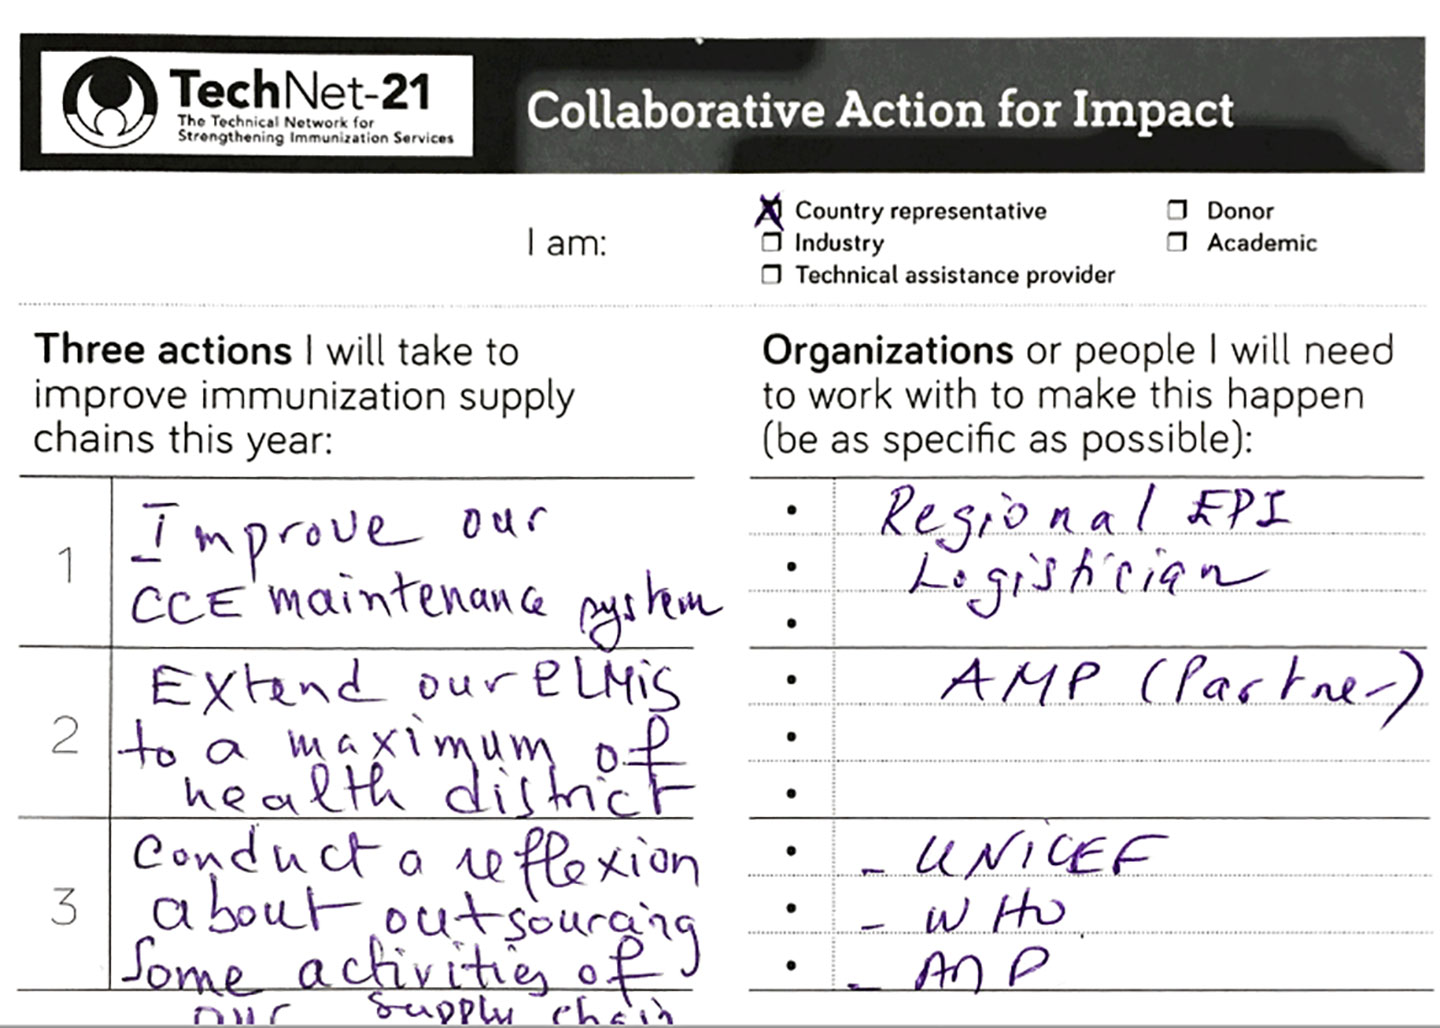 Example of a commitment card filled out by participants to encourage concrete action and collaboration following the conference.